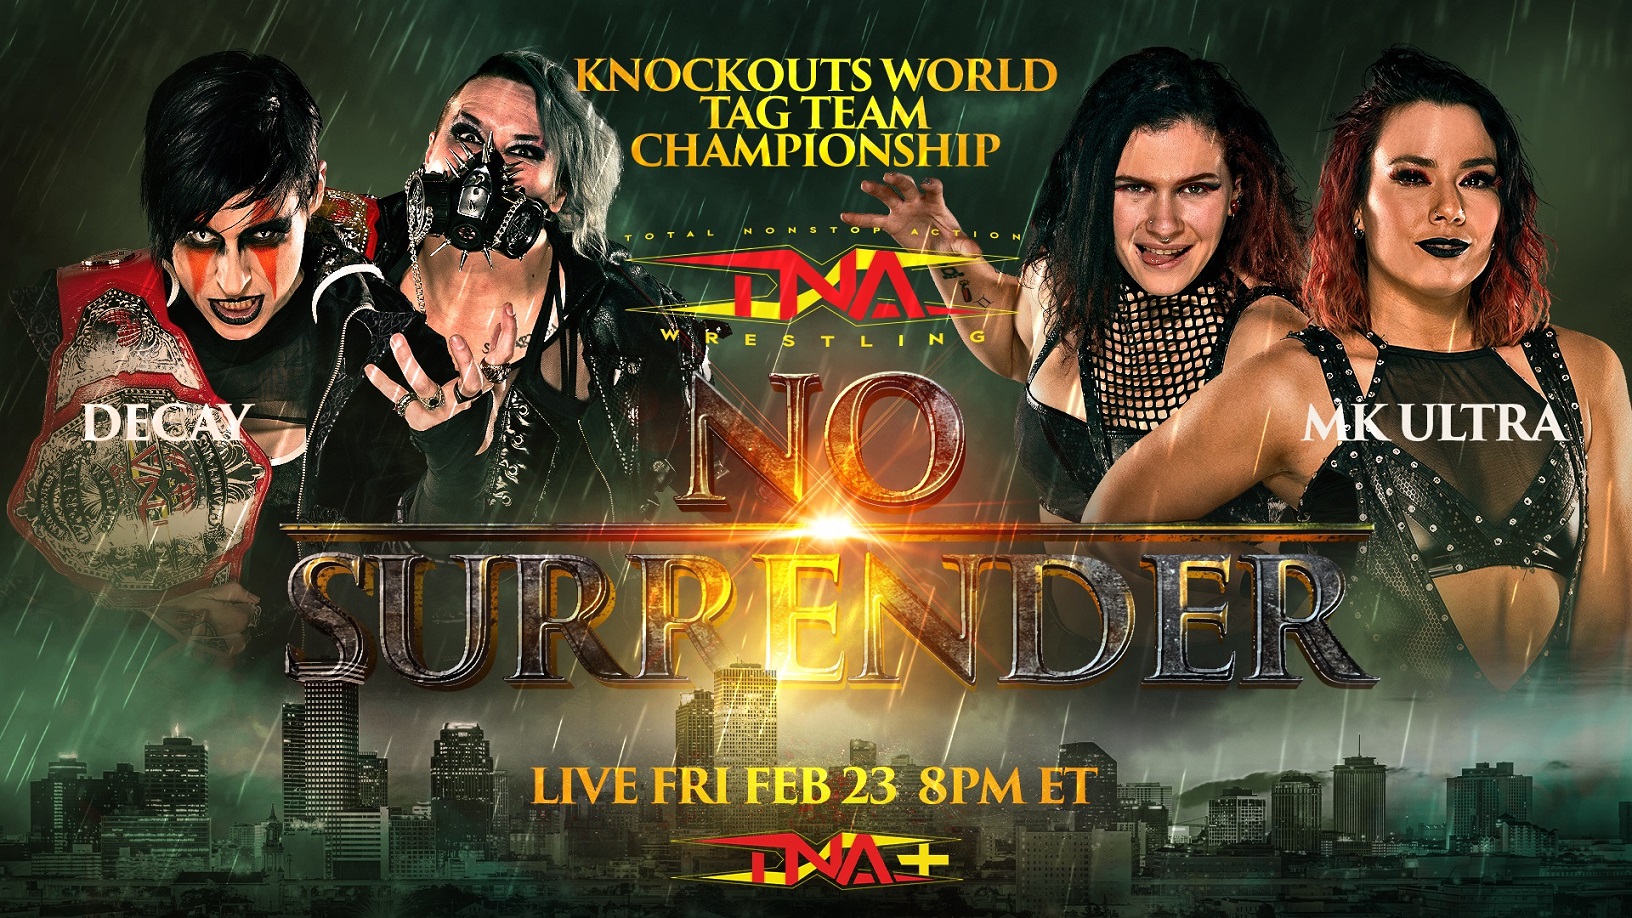 MK Ultra Seek to Reclaim Knockouts Tag Gold in No Surrender Rematch vs. Decay – TNA Wrestling